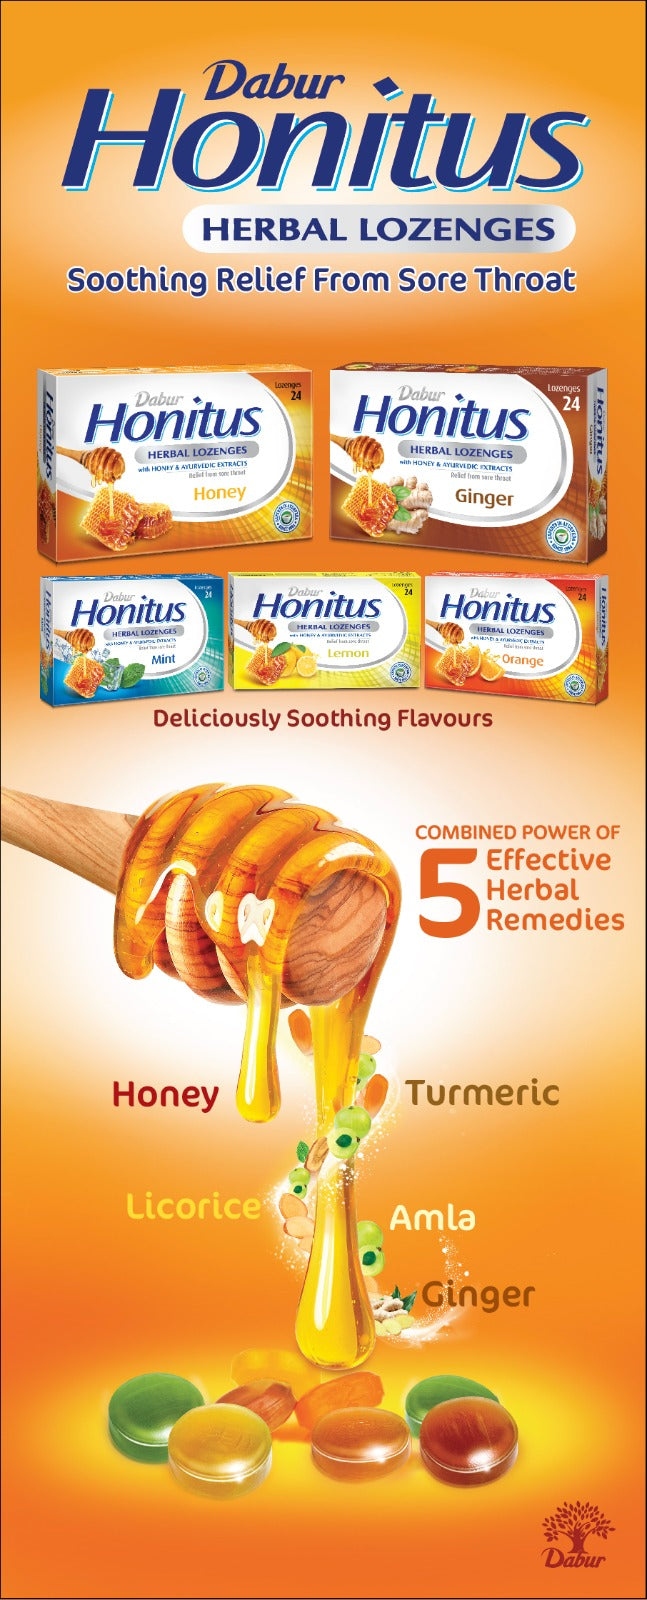 Dabur Honitus Herbal Lozenges Smoothing Relief From Sour Throat with Honey, Turmeric, Licorice, Amla, Ginger